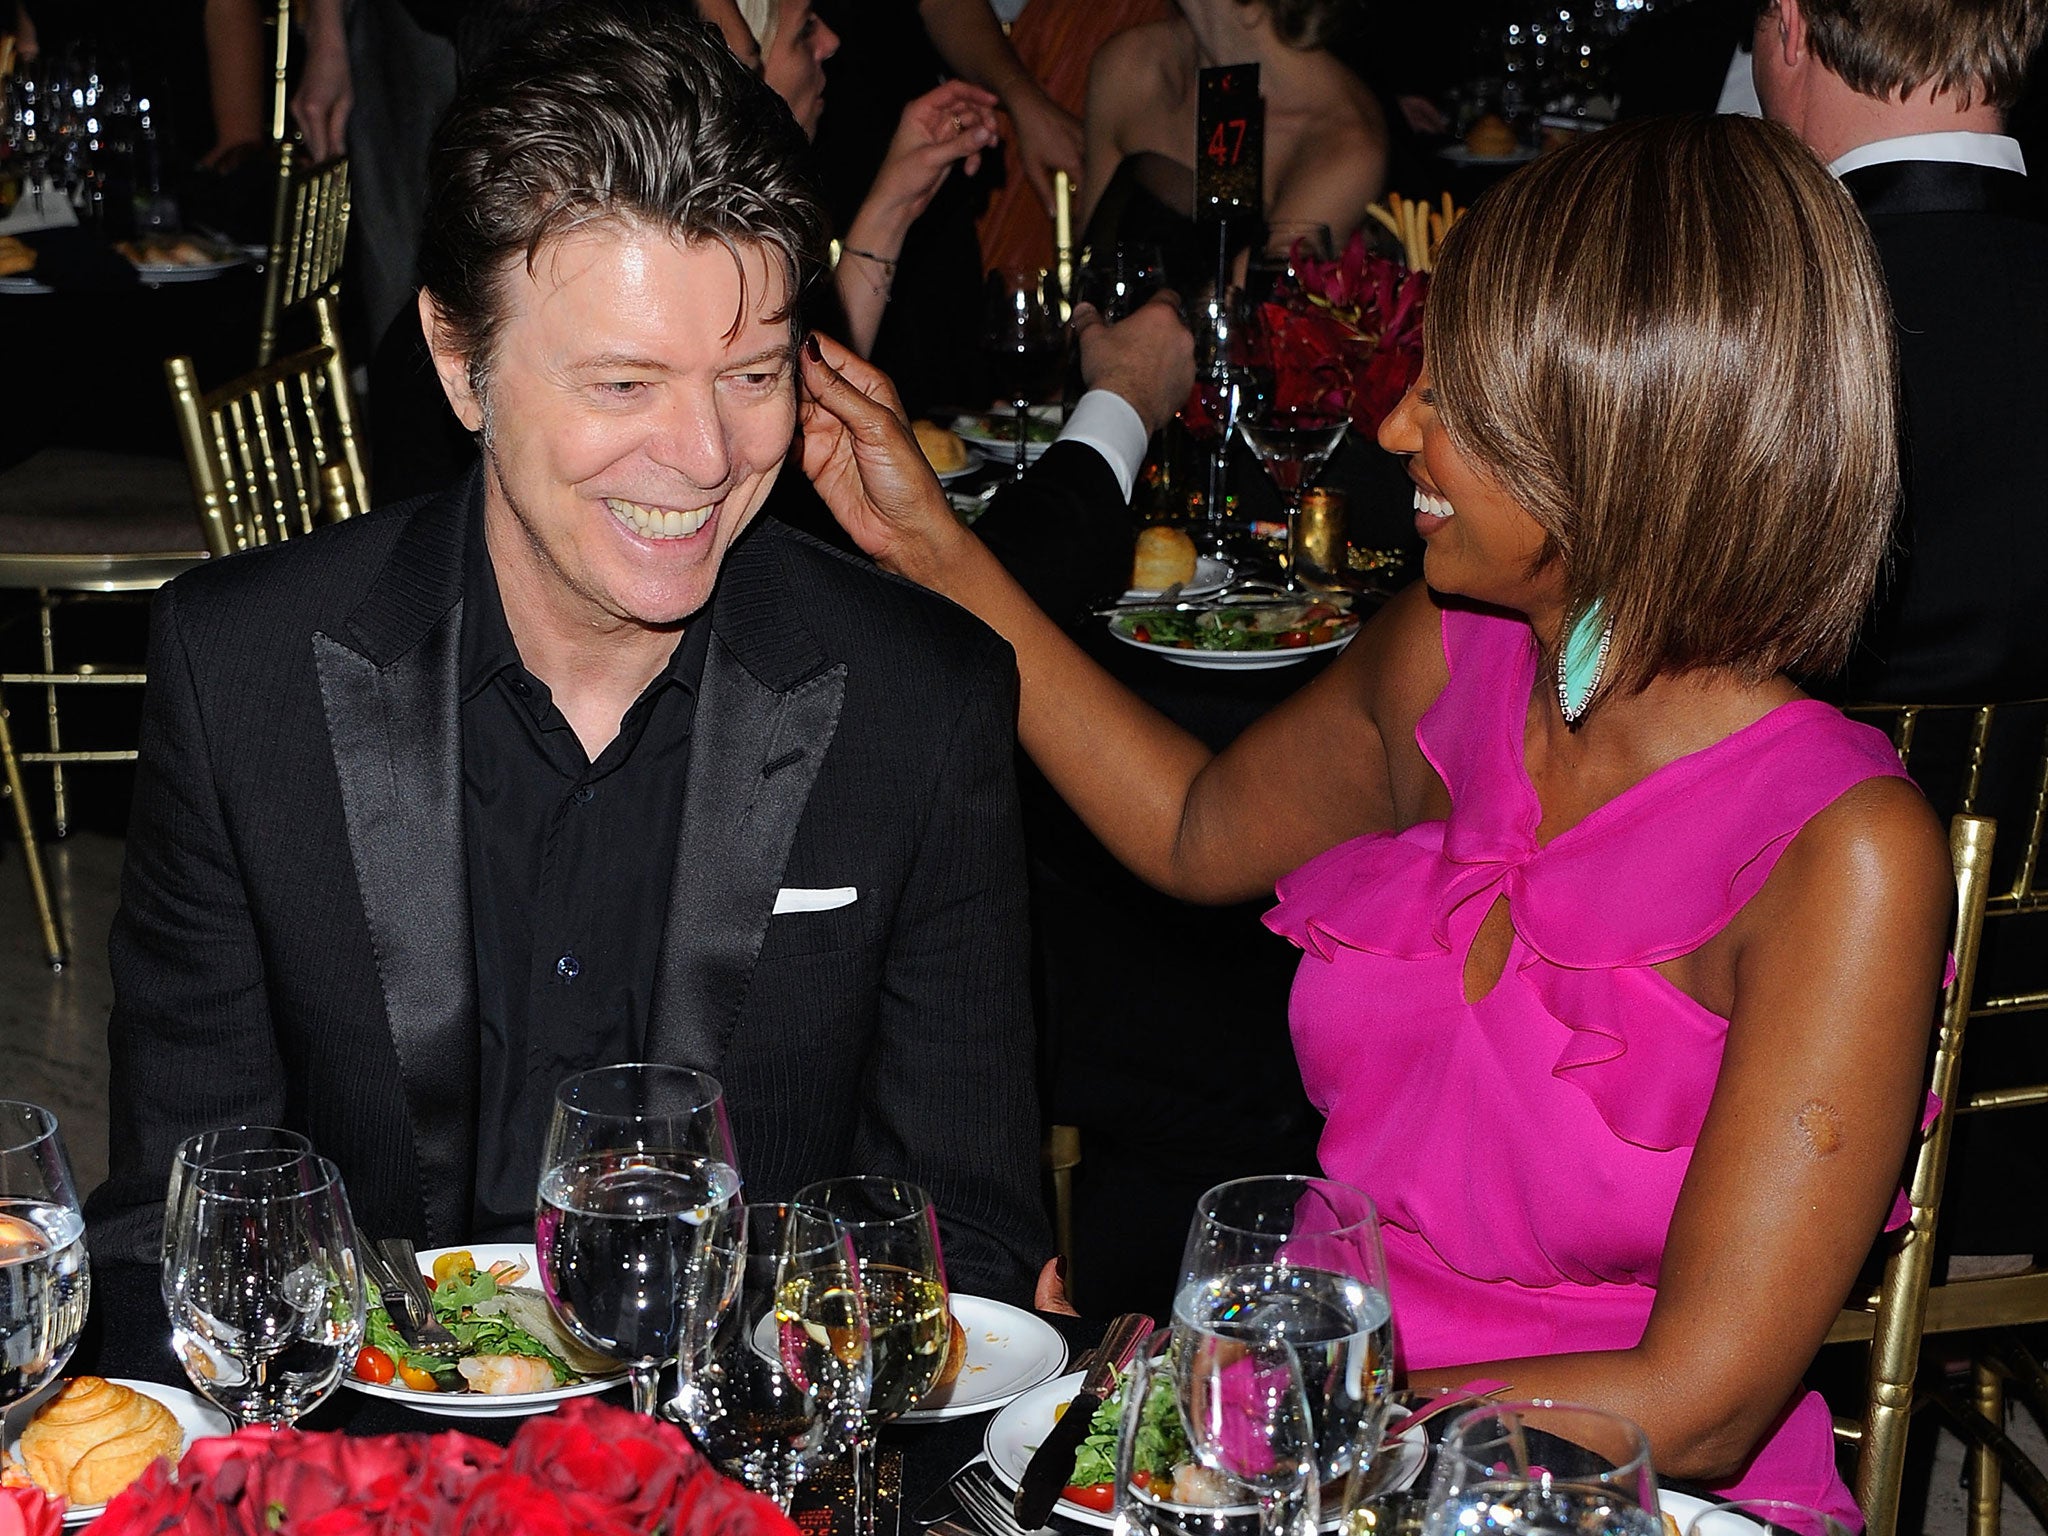 David Bowie and Iman Abdulmajid attend the DKMS' 5th Annual Gala on 28 APril, 2011, in New York City